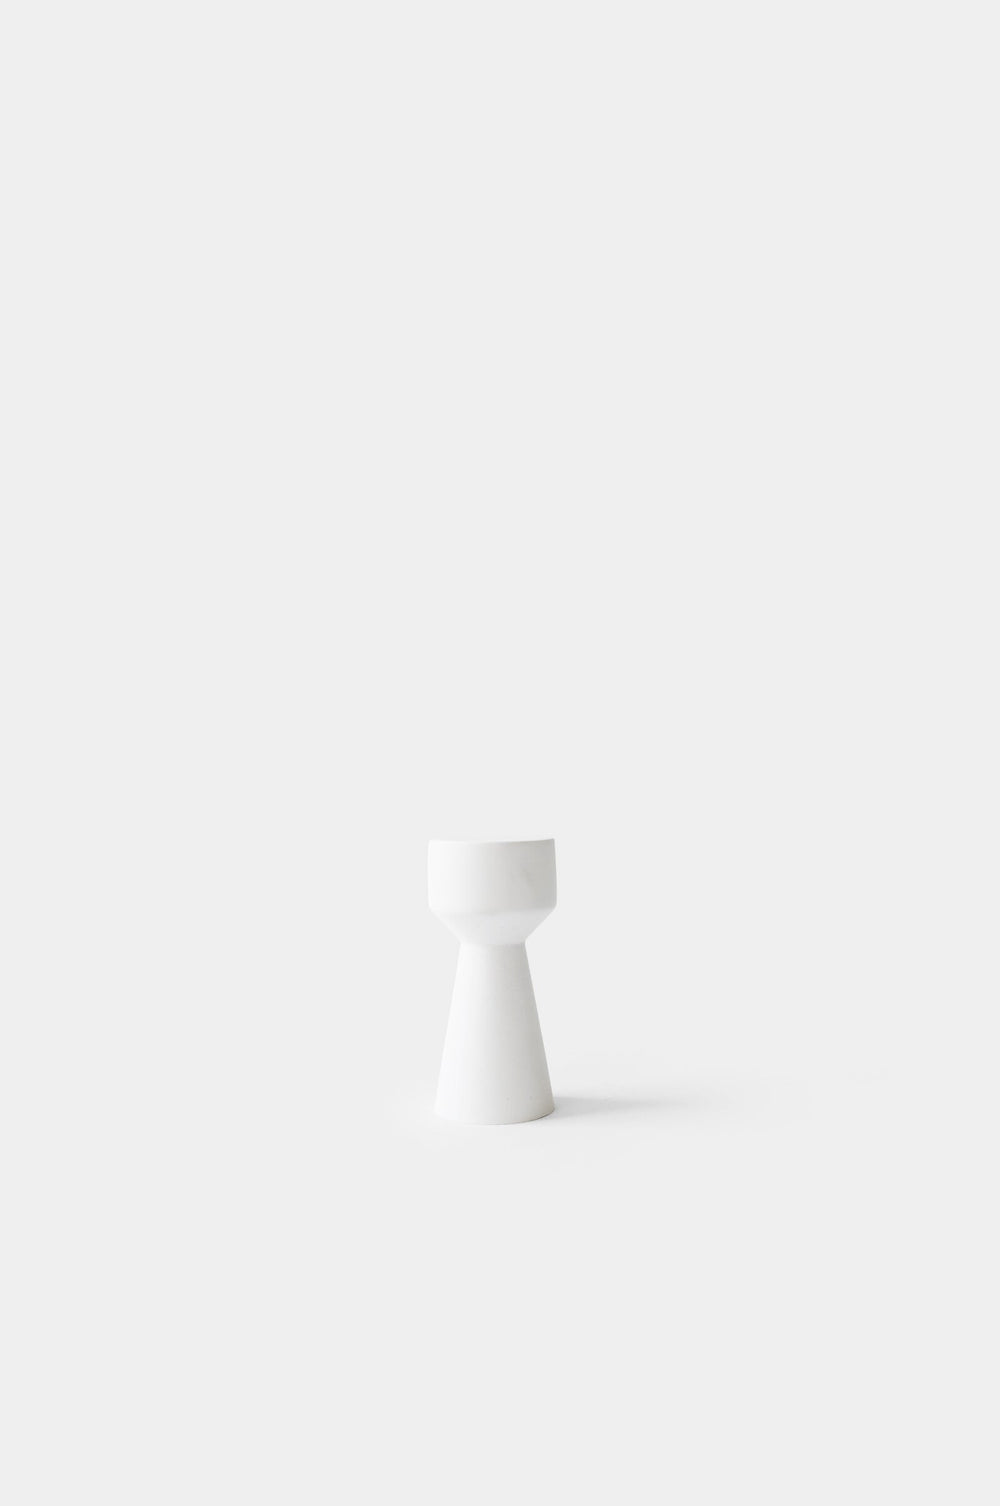 Chess piece - King Board Games House Raccoon Pearl White 